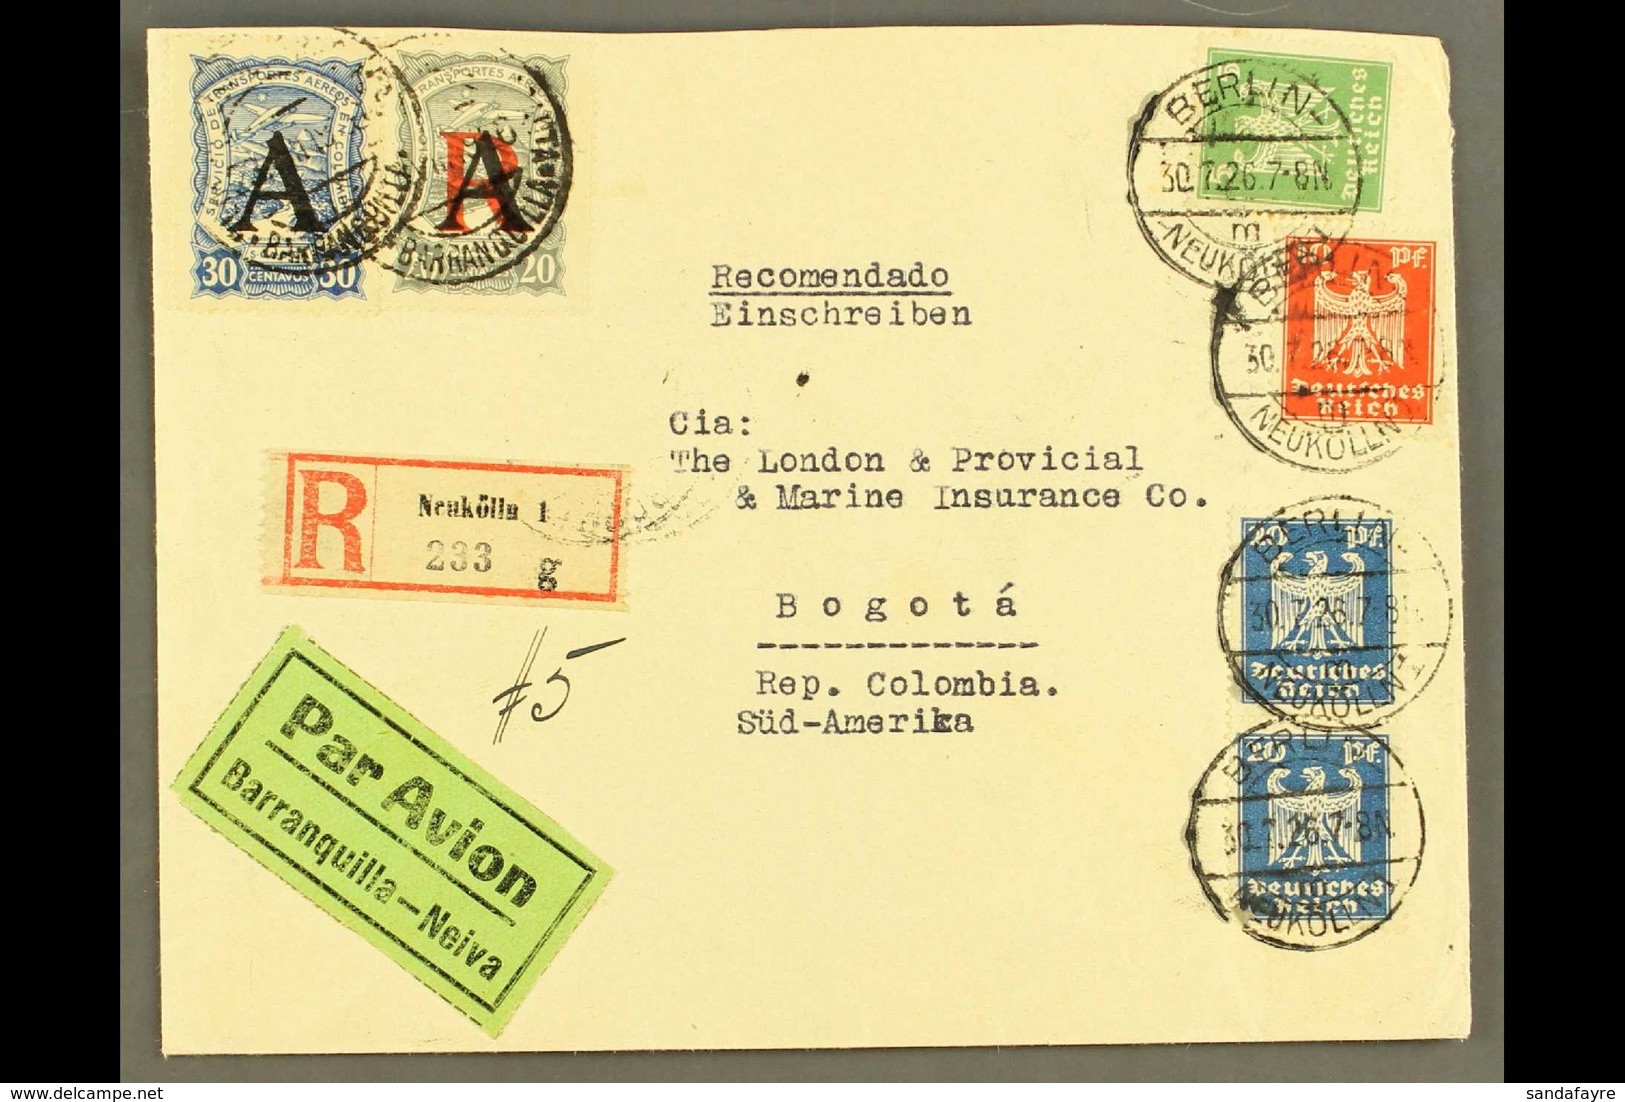 SCADTA  1926 (30 July) Registered Cover From Germany Addressed To Bogota, Bearing Germany 5pf, 10pf & 20pf Pair Tied By  - Colombia